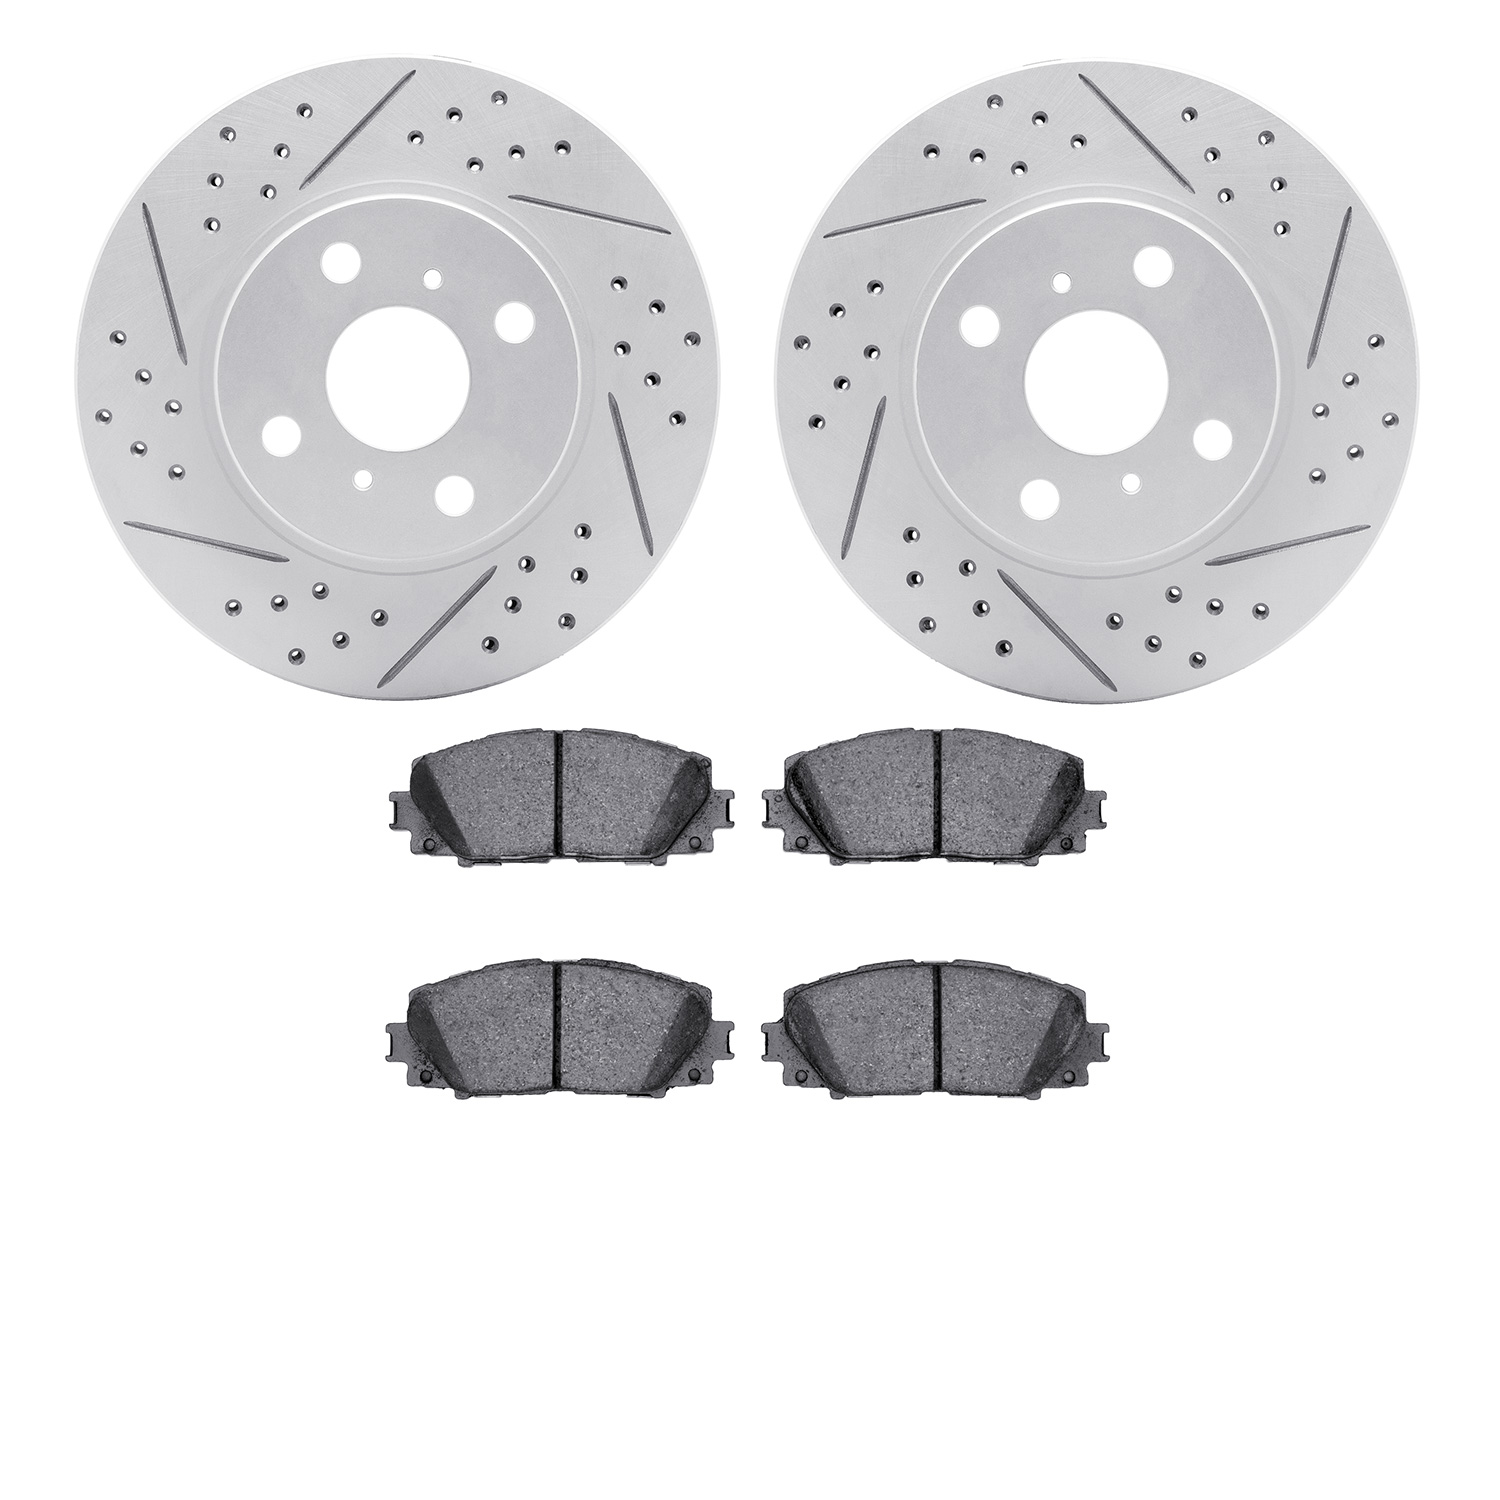 2502-76033 Geoperformance Drilled/Slotted Rotors w/5000 Advanced Brake Pads Kit, 2006-2018 Lexus/Toyota/Scion, Position: Front